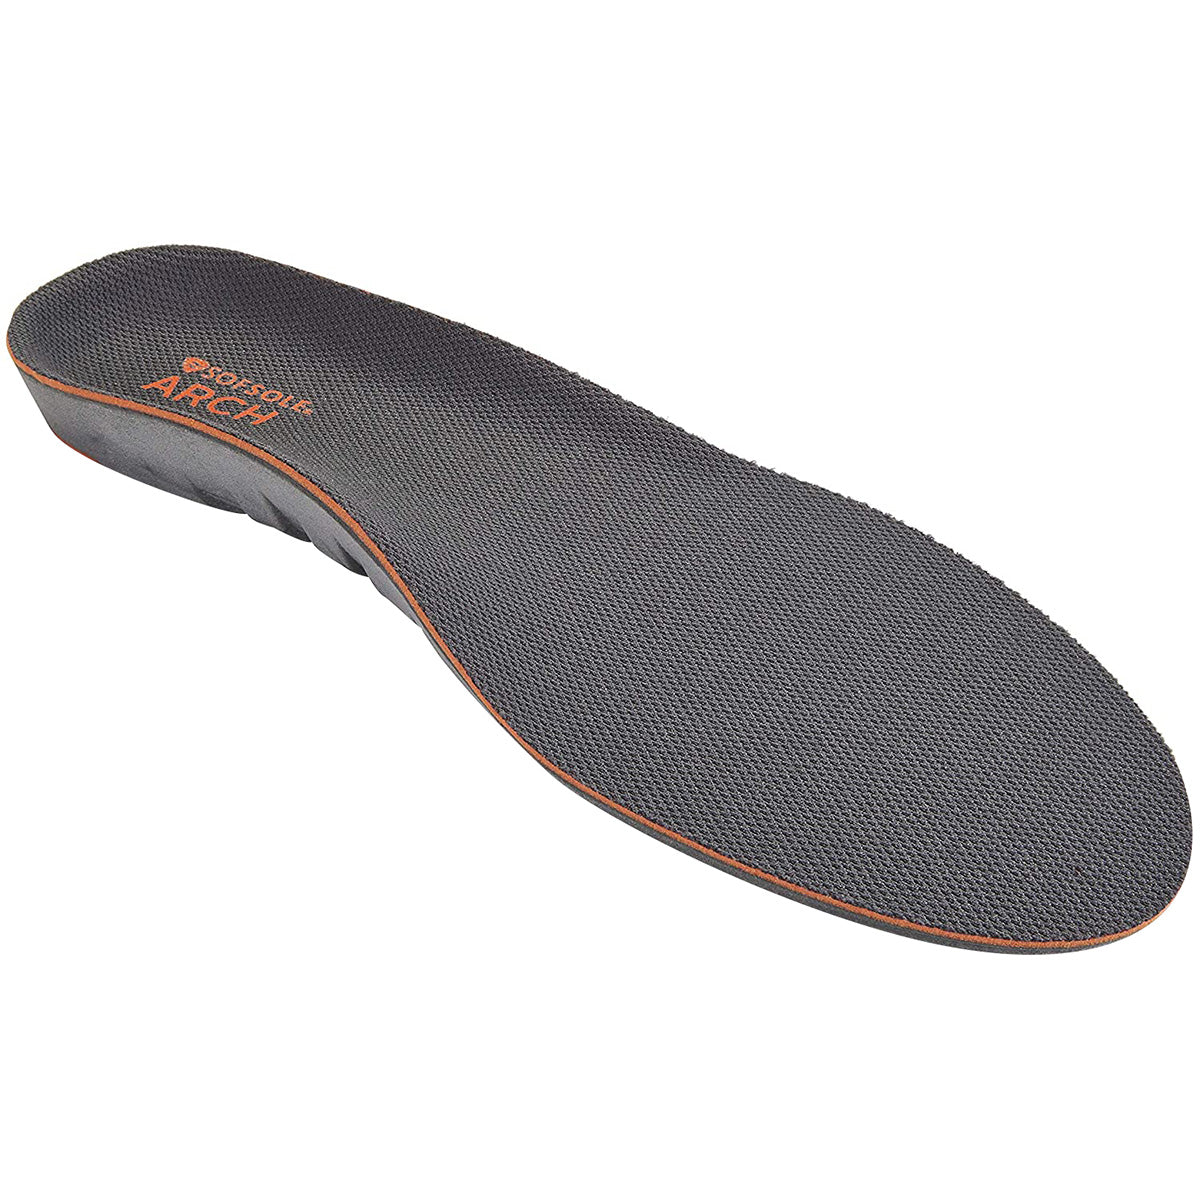 Sof Sole Arch Full Length Shoe Insoles SofSole